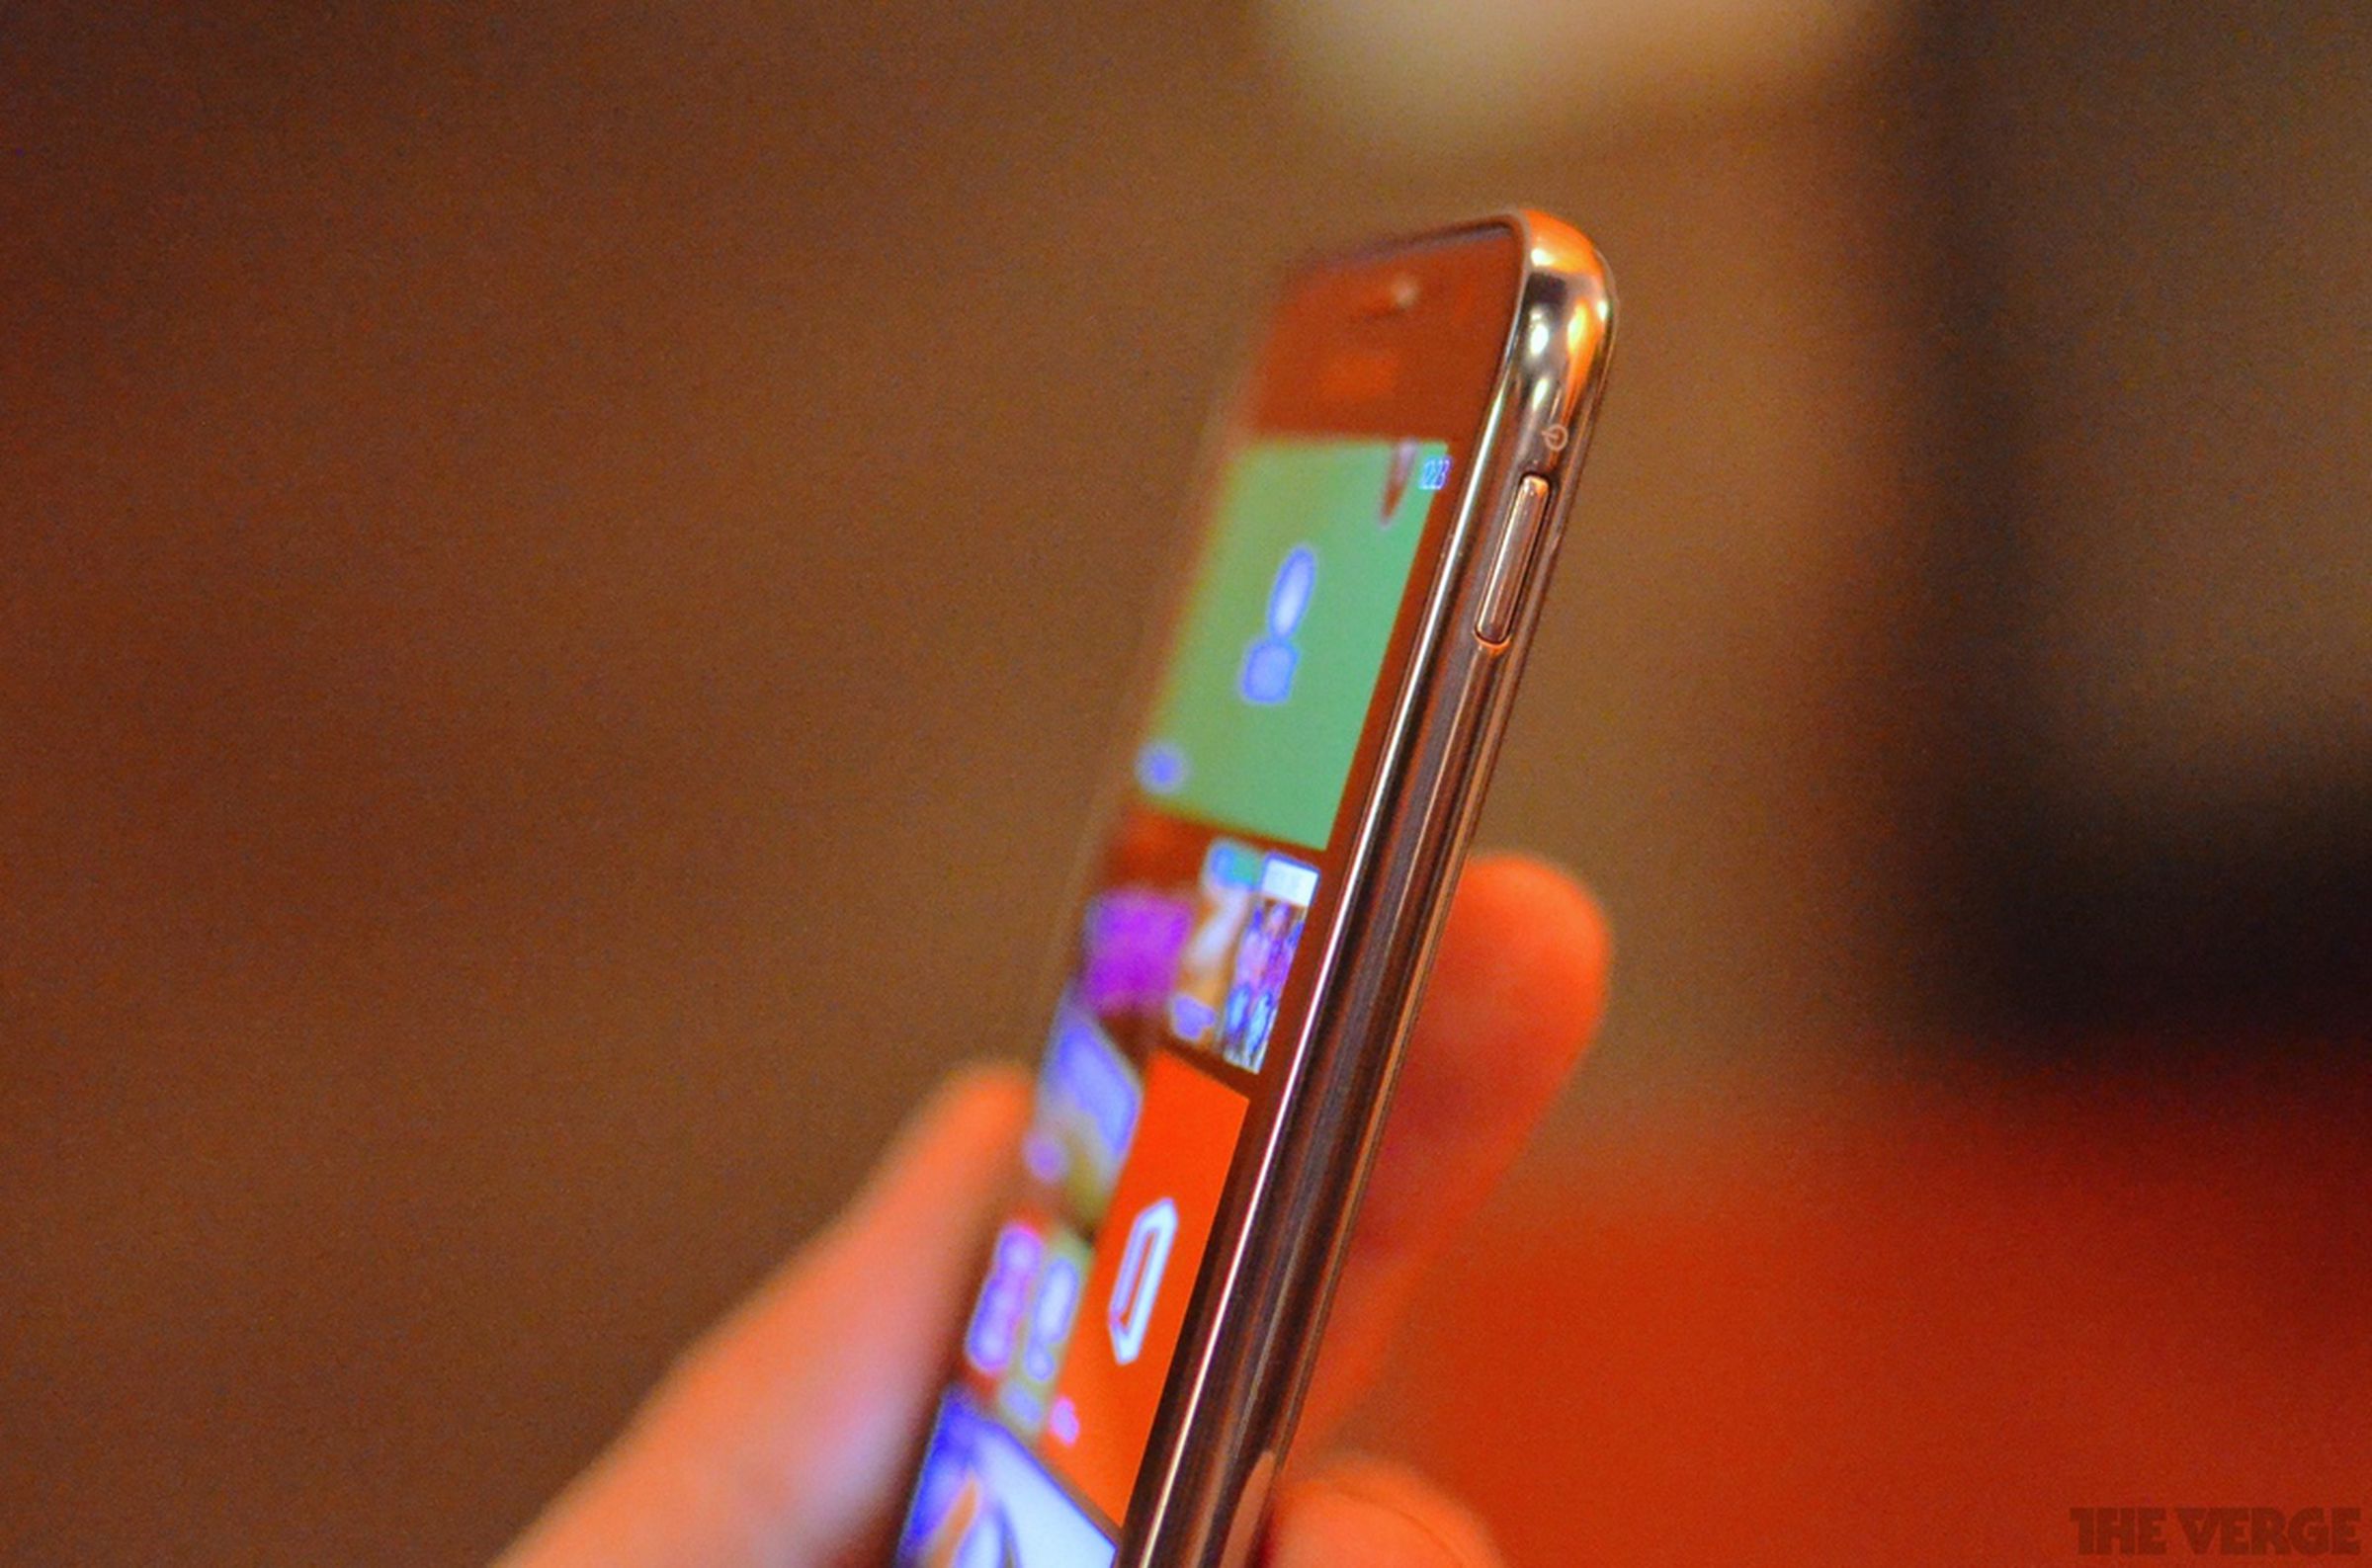 Samsung Ativ S hands-on pictures